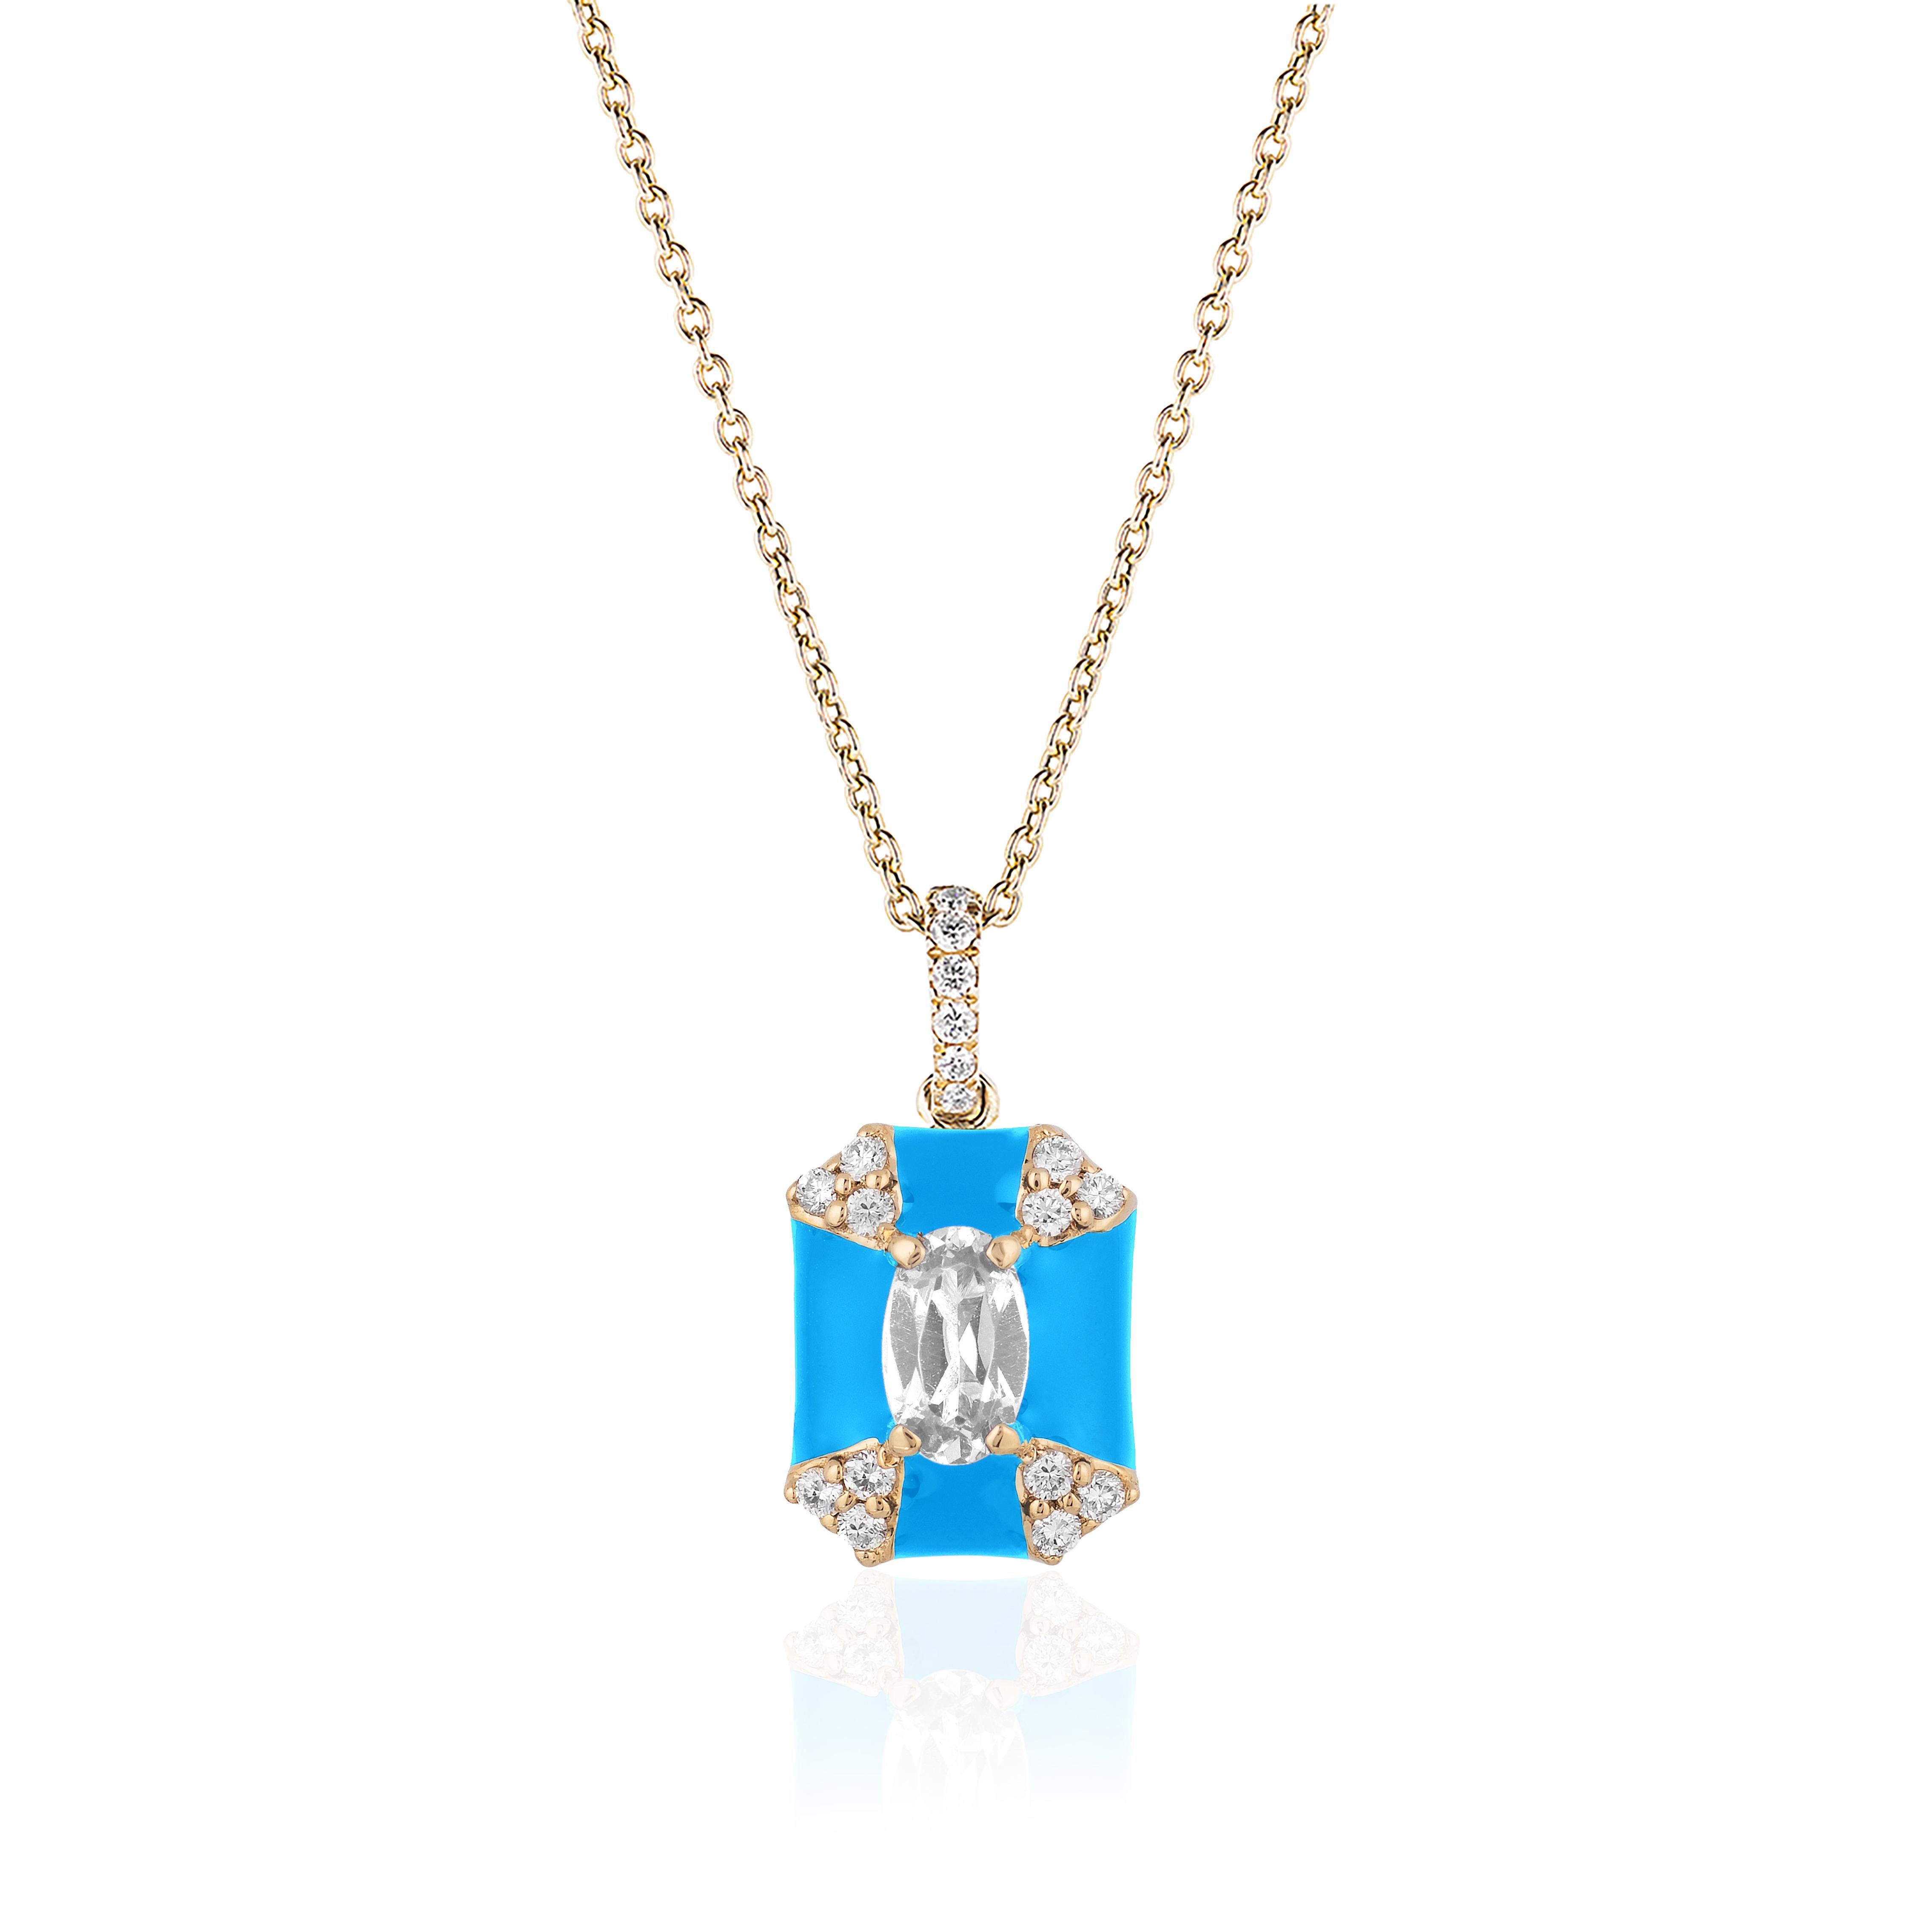 Octagon Turquoise Enamel Pendant with Diamonds in 18 k Yellow Gold. From 'Queen' Collection
